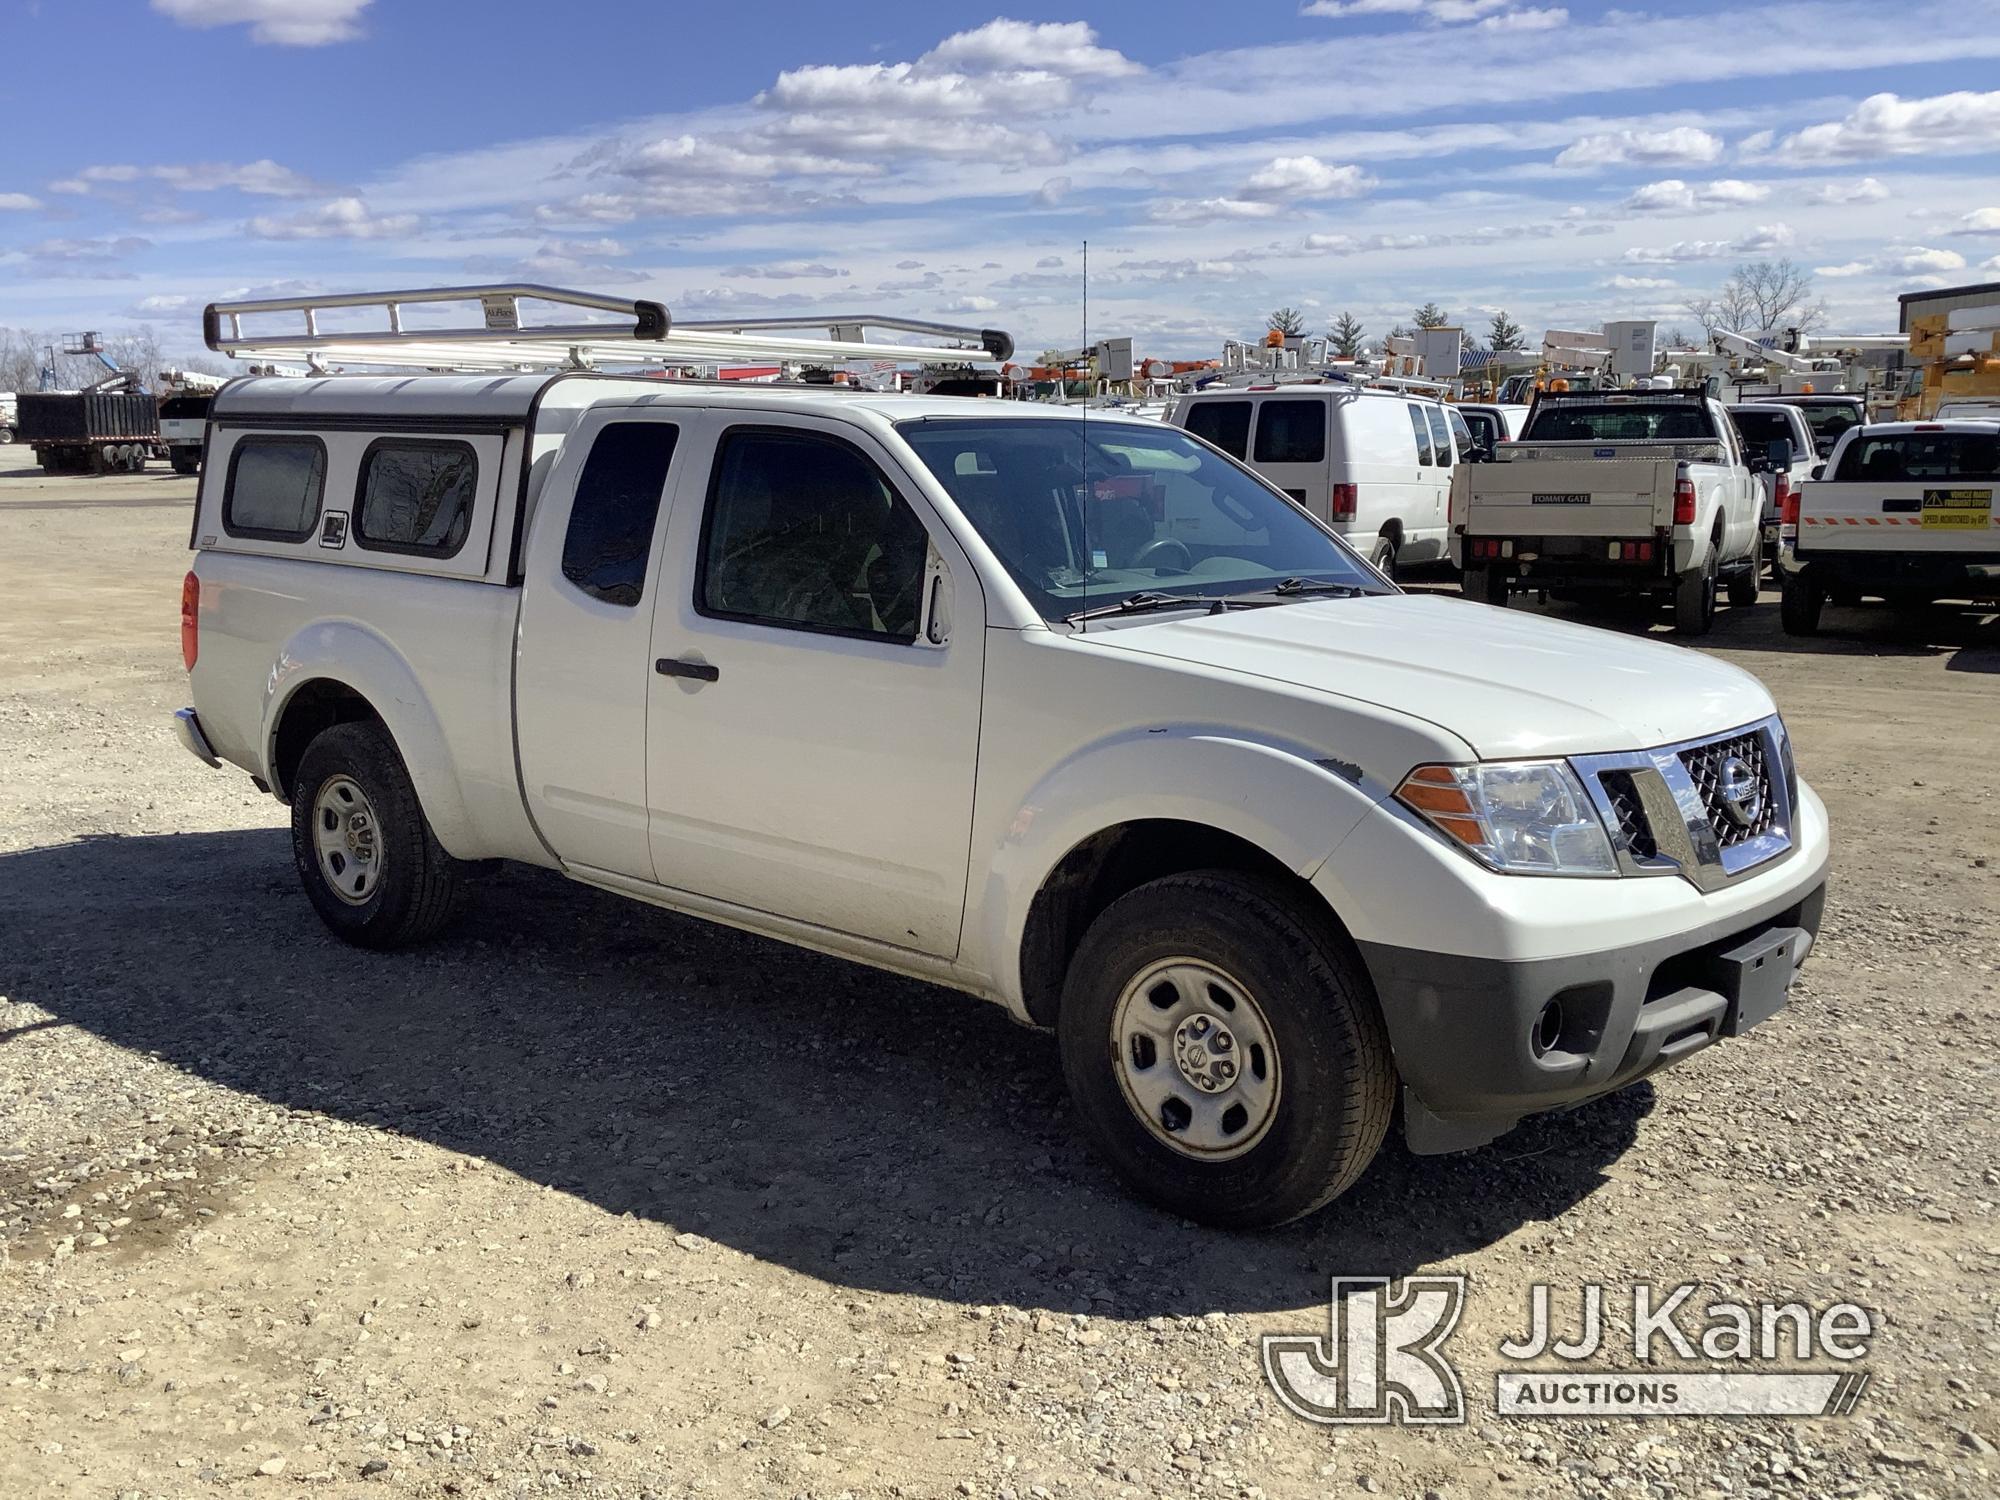 (Shrewsbury, MA) 2016 Nissan Frontier Extended-Cab Pickup Truck Runs & Moves) (Body & Rust Damage, M